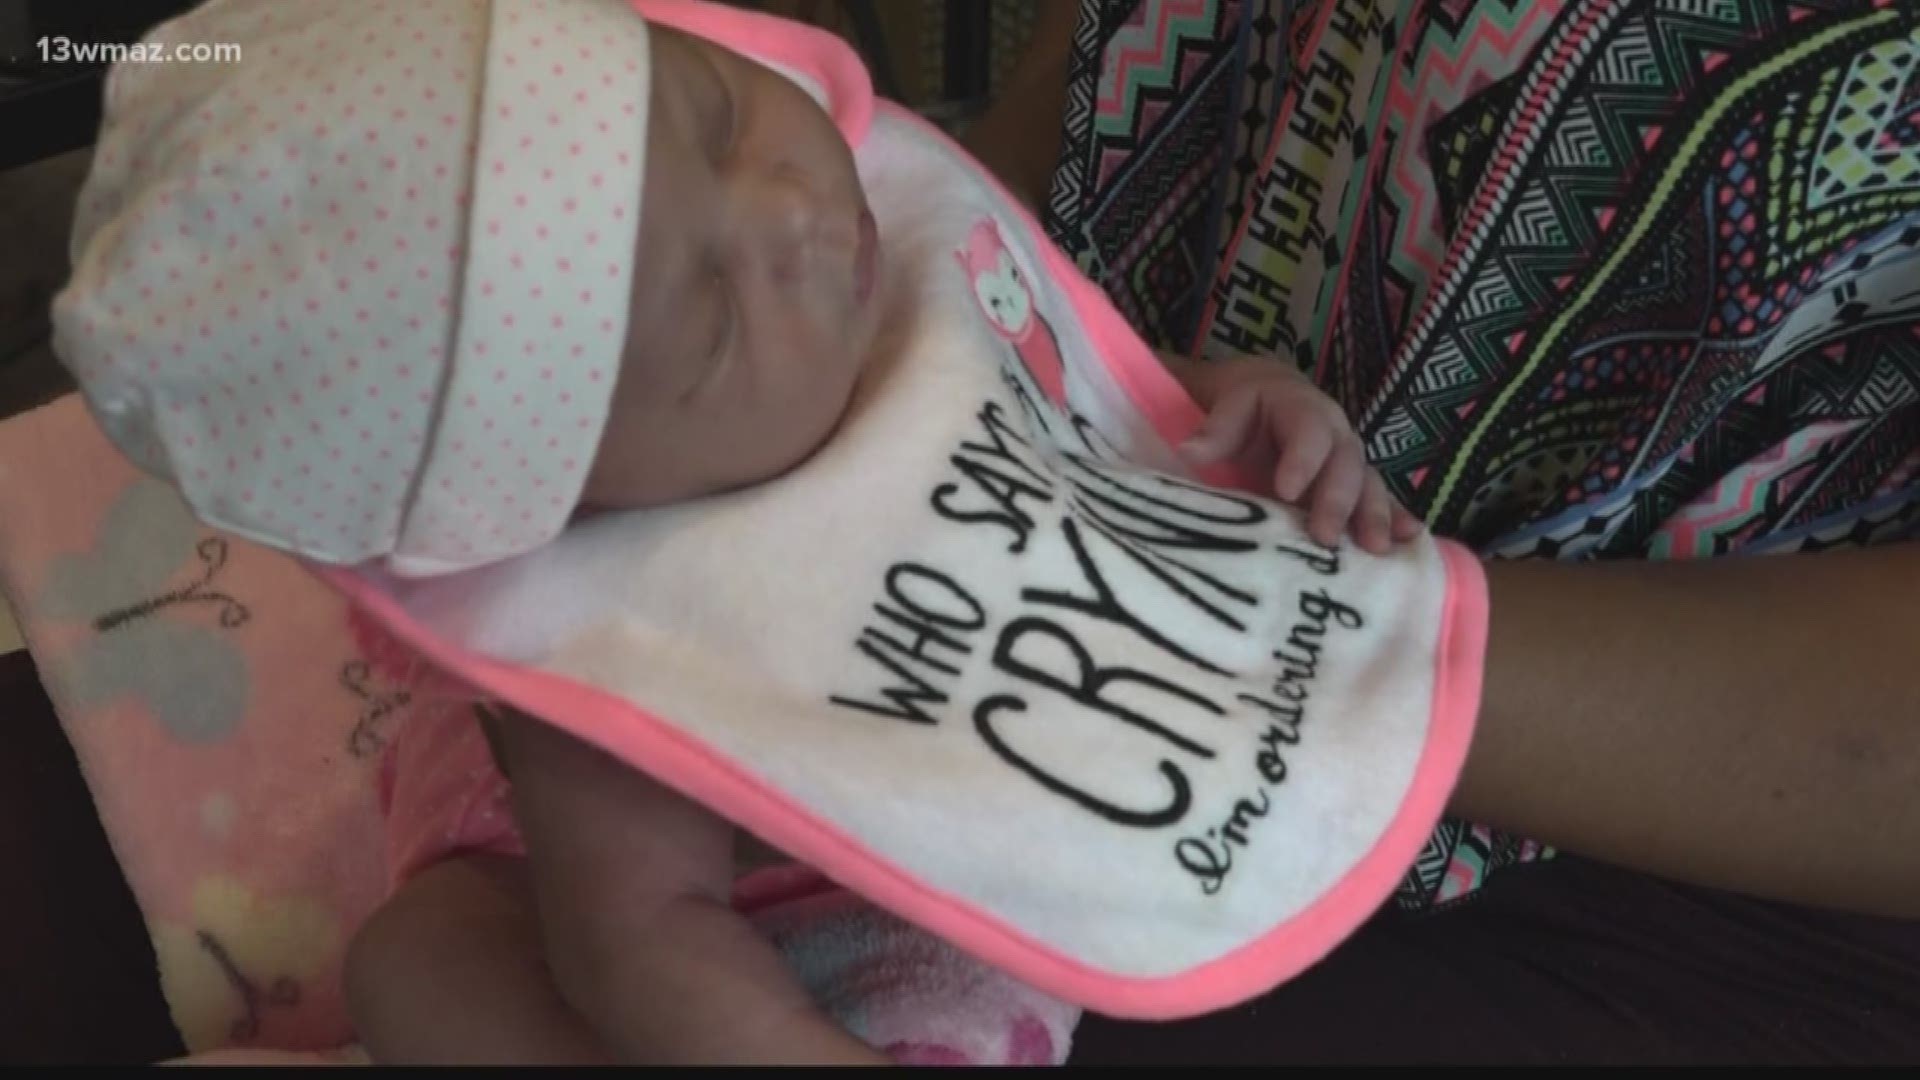 Forsyth hasn't seen a baby born in town in almost 30 years, but now that's changed. The new OBGYNE Birthing Center for Natural Deliveries in Forsyth welcomed their first baby since opening in December.